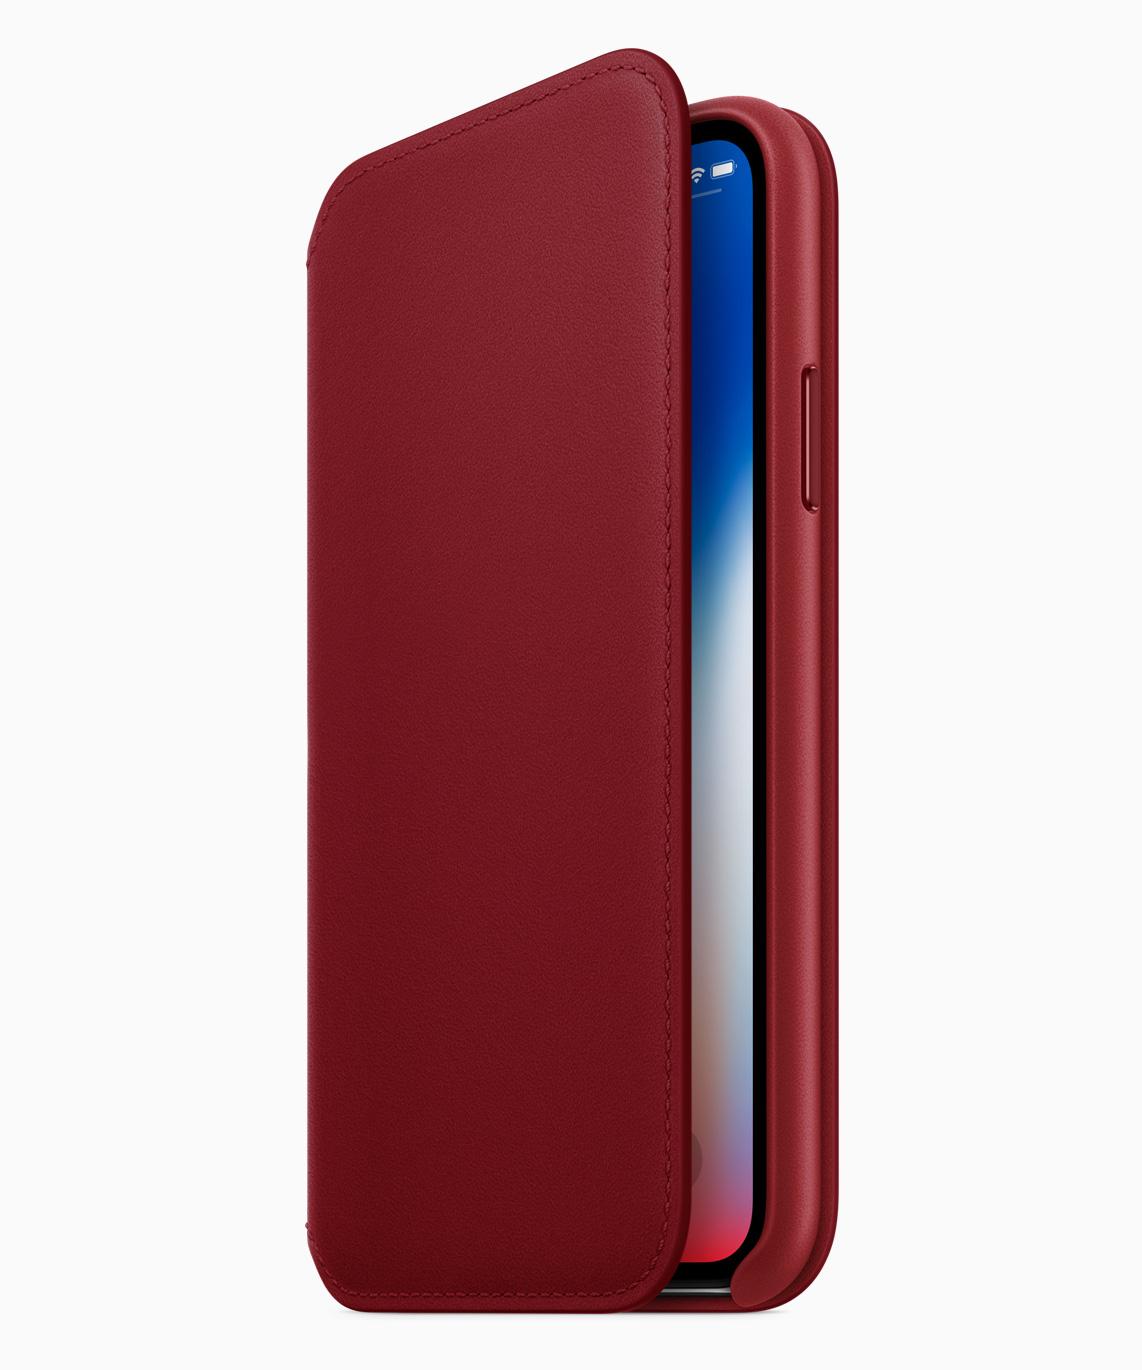 czerwony iphone 8 iphone 8 plus product red 1 class="wp-image-713079" 